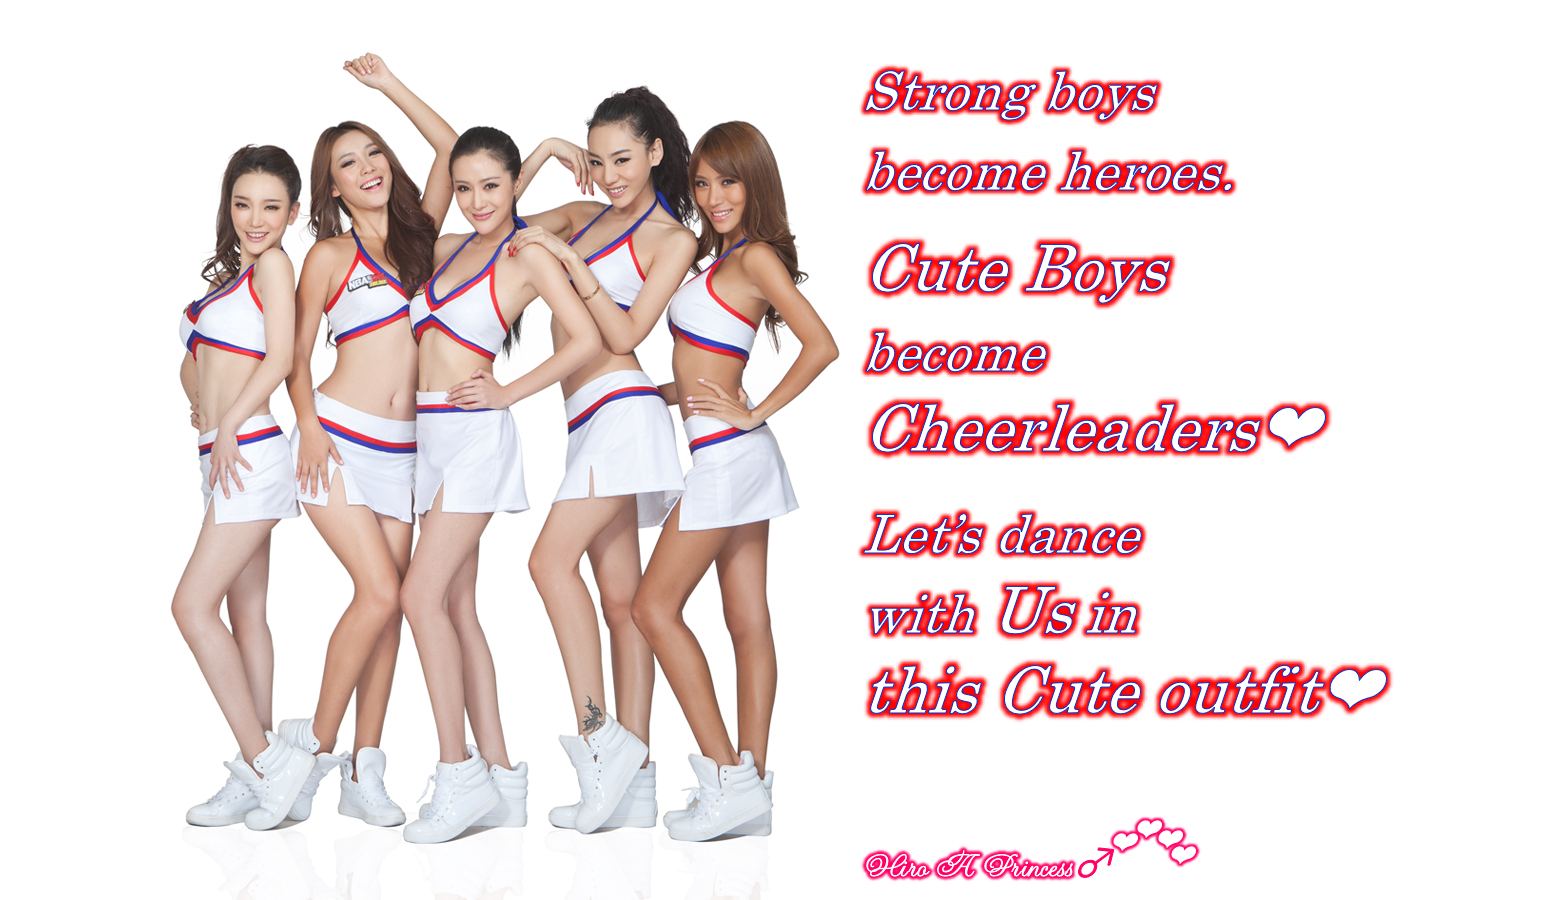 Strong boys become heroes, Cute Boys become Cheerleaders E